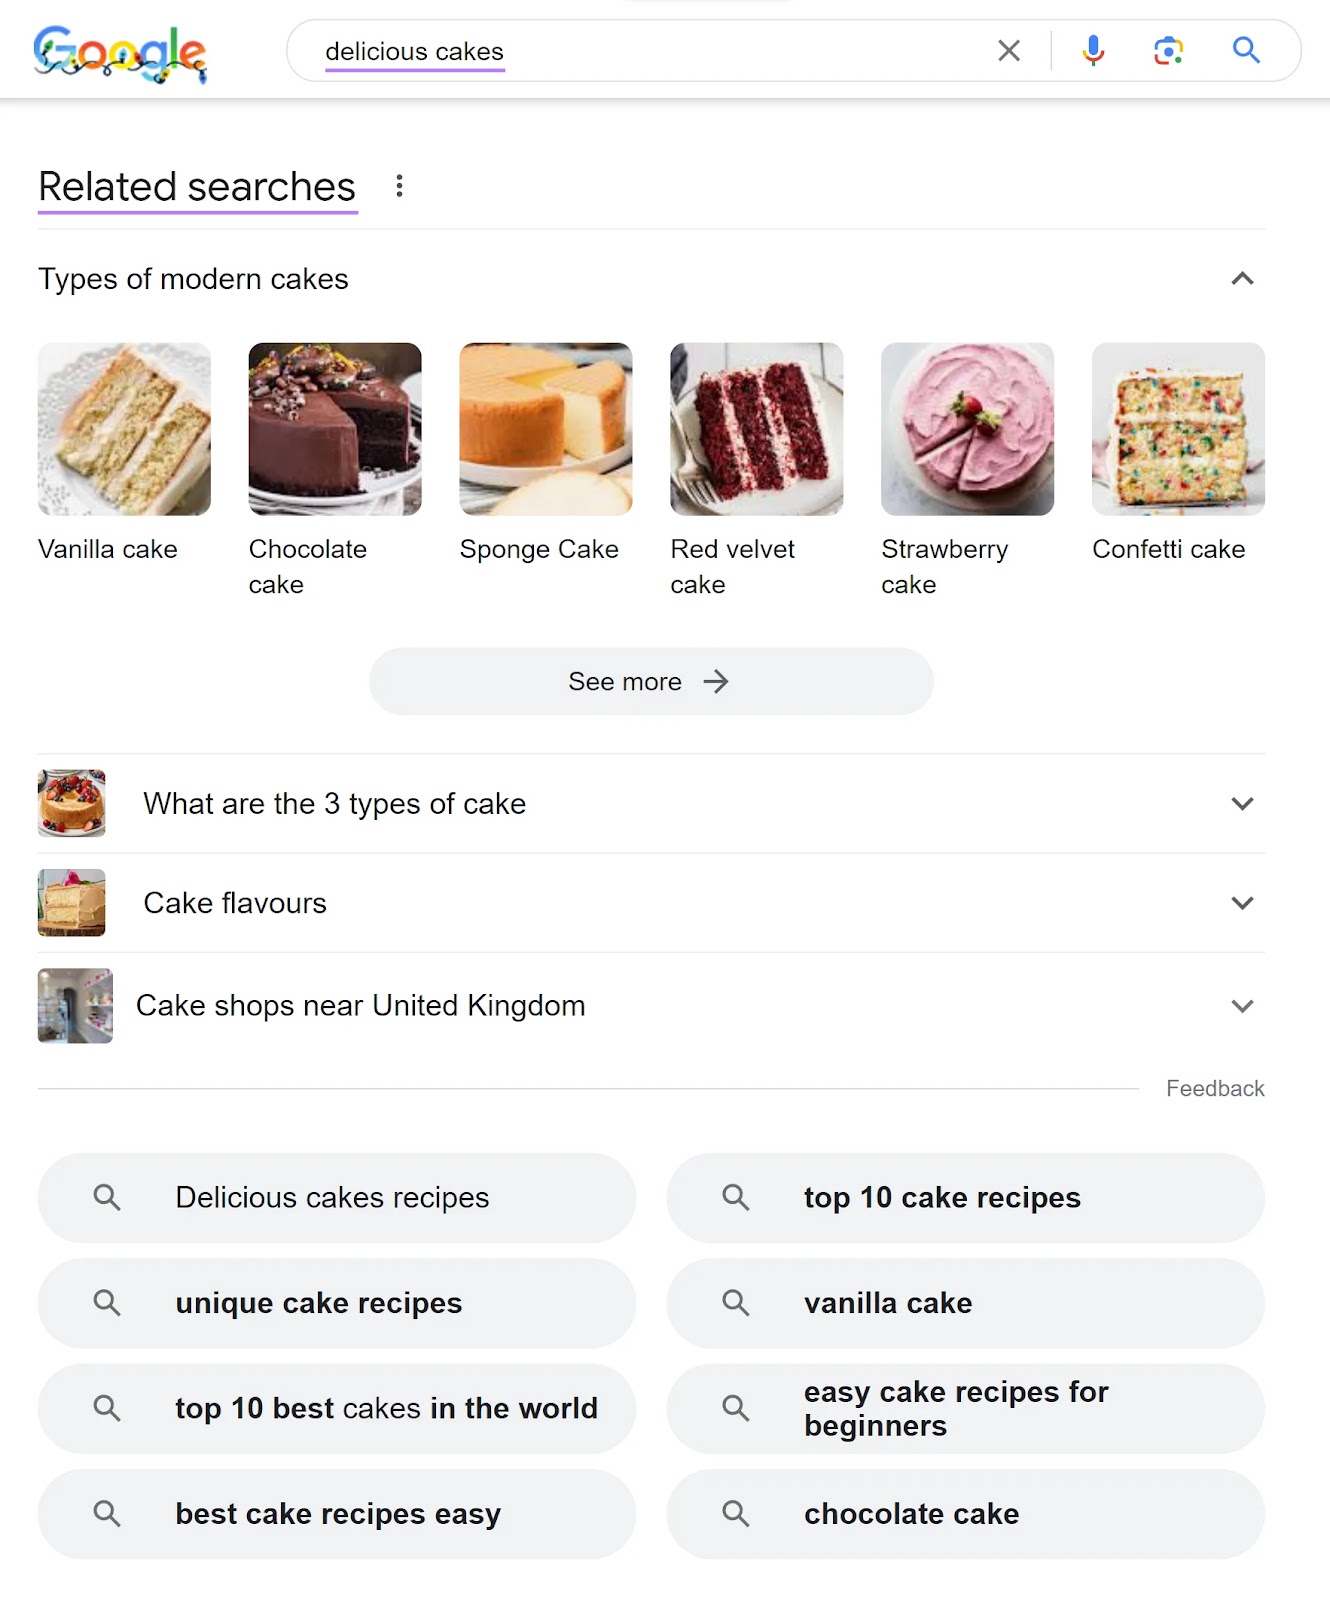 “Related searches” section on SERP for "delicious cakes" query